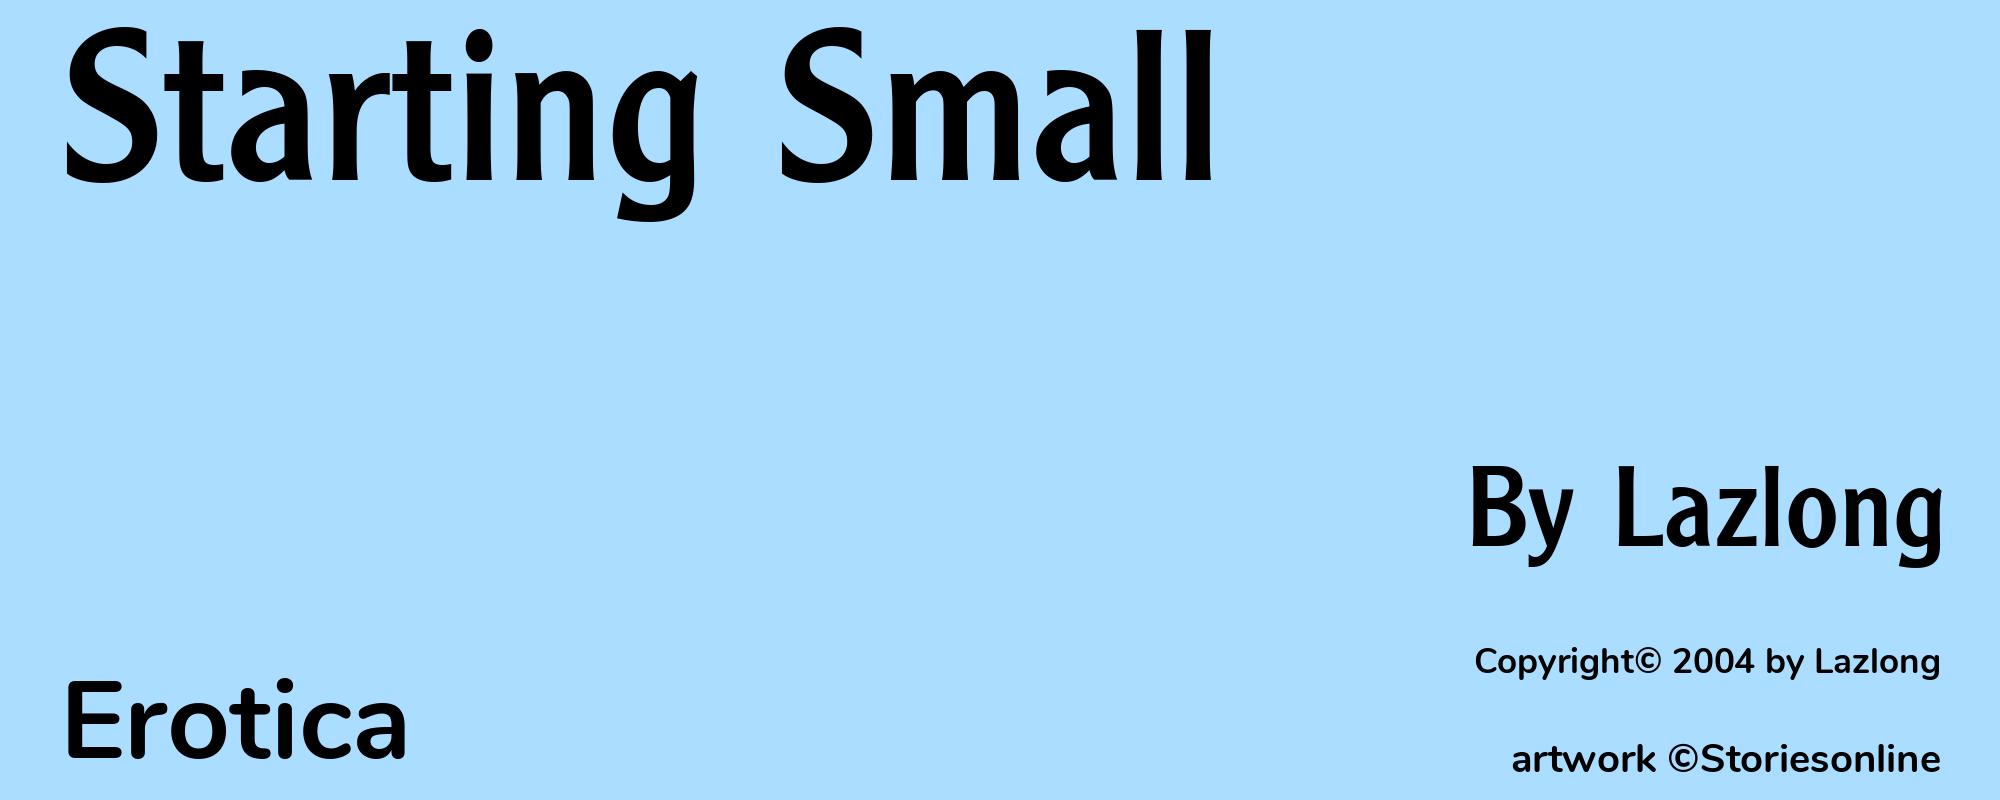 Starting Small - Cover